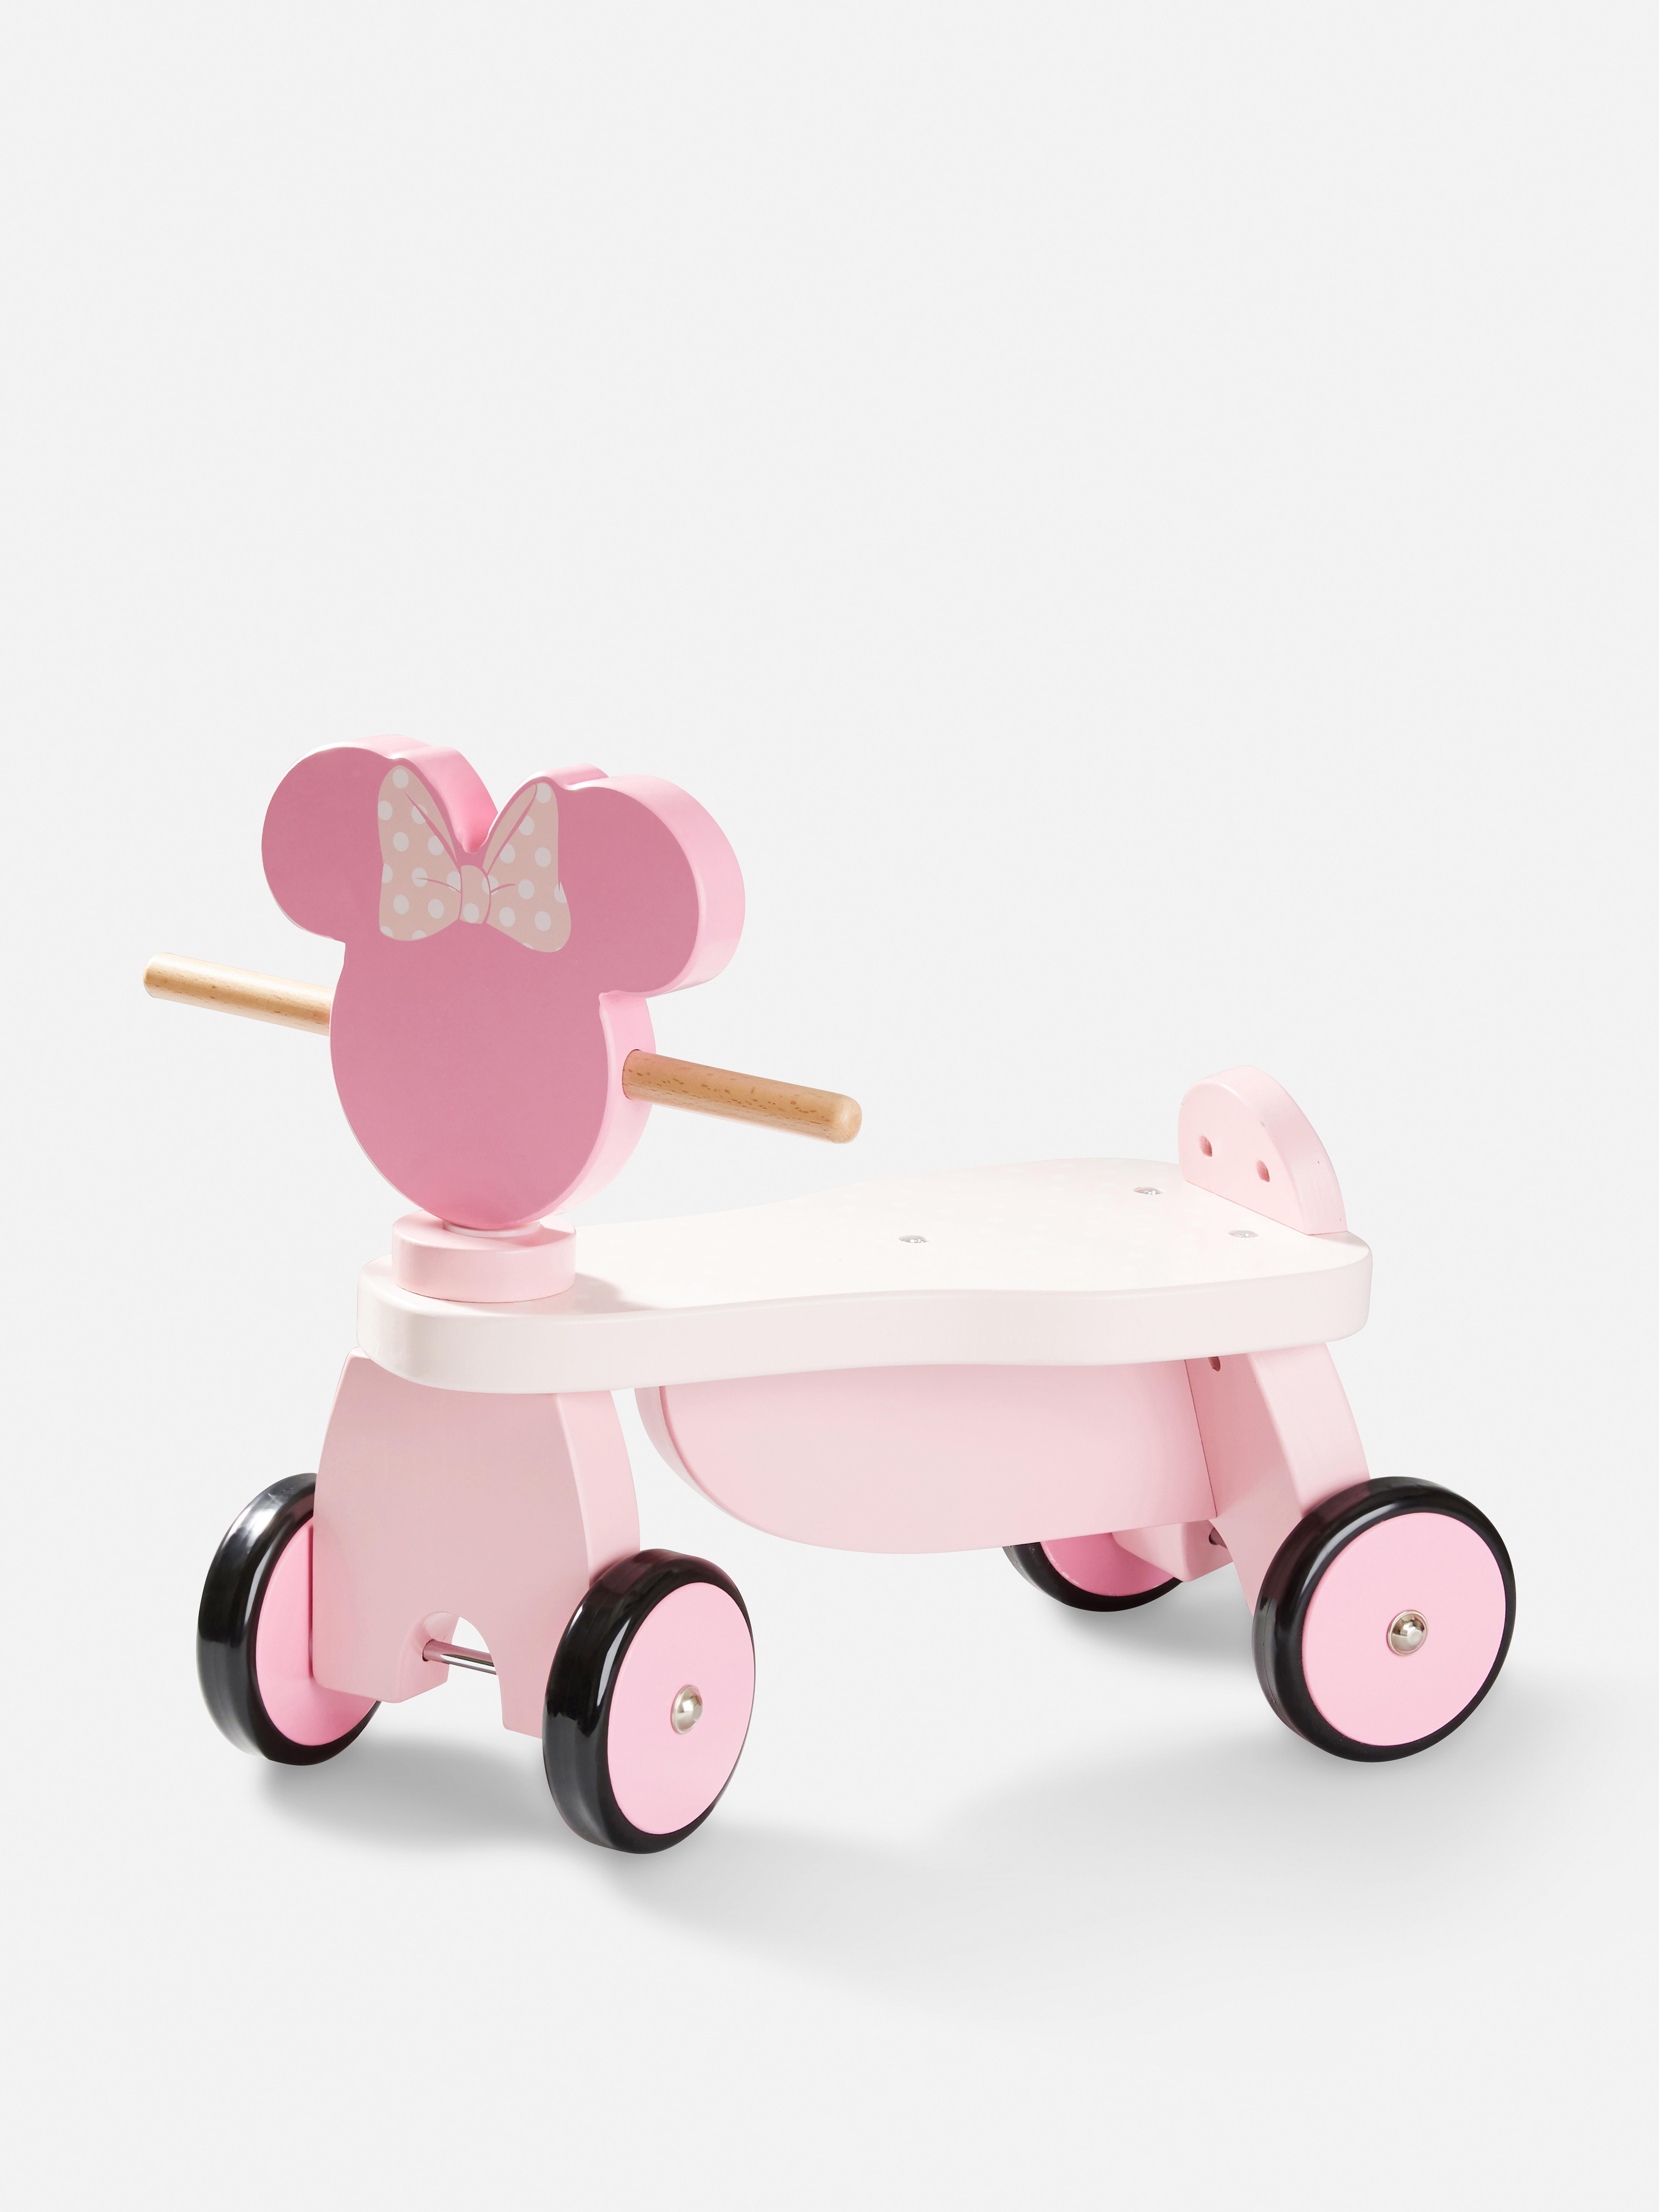 Disney’s Minnie Mouse Wooden Ride-on Toy